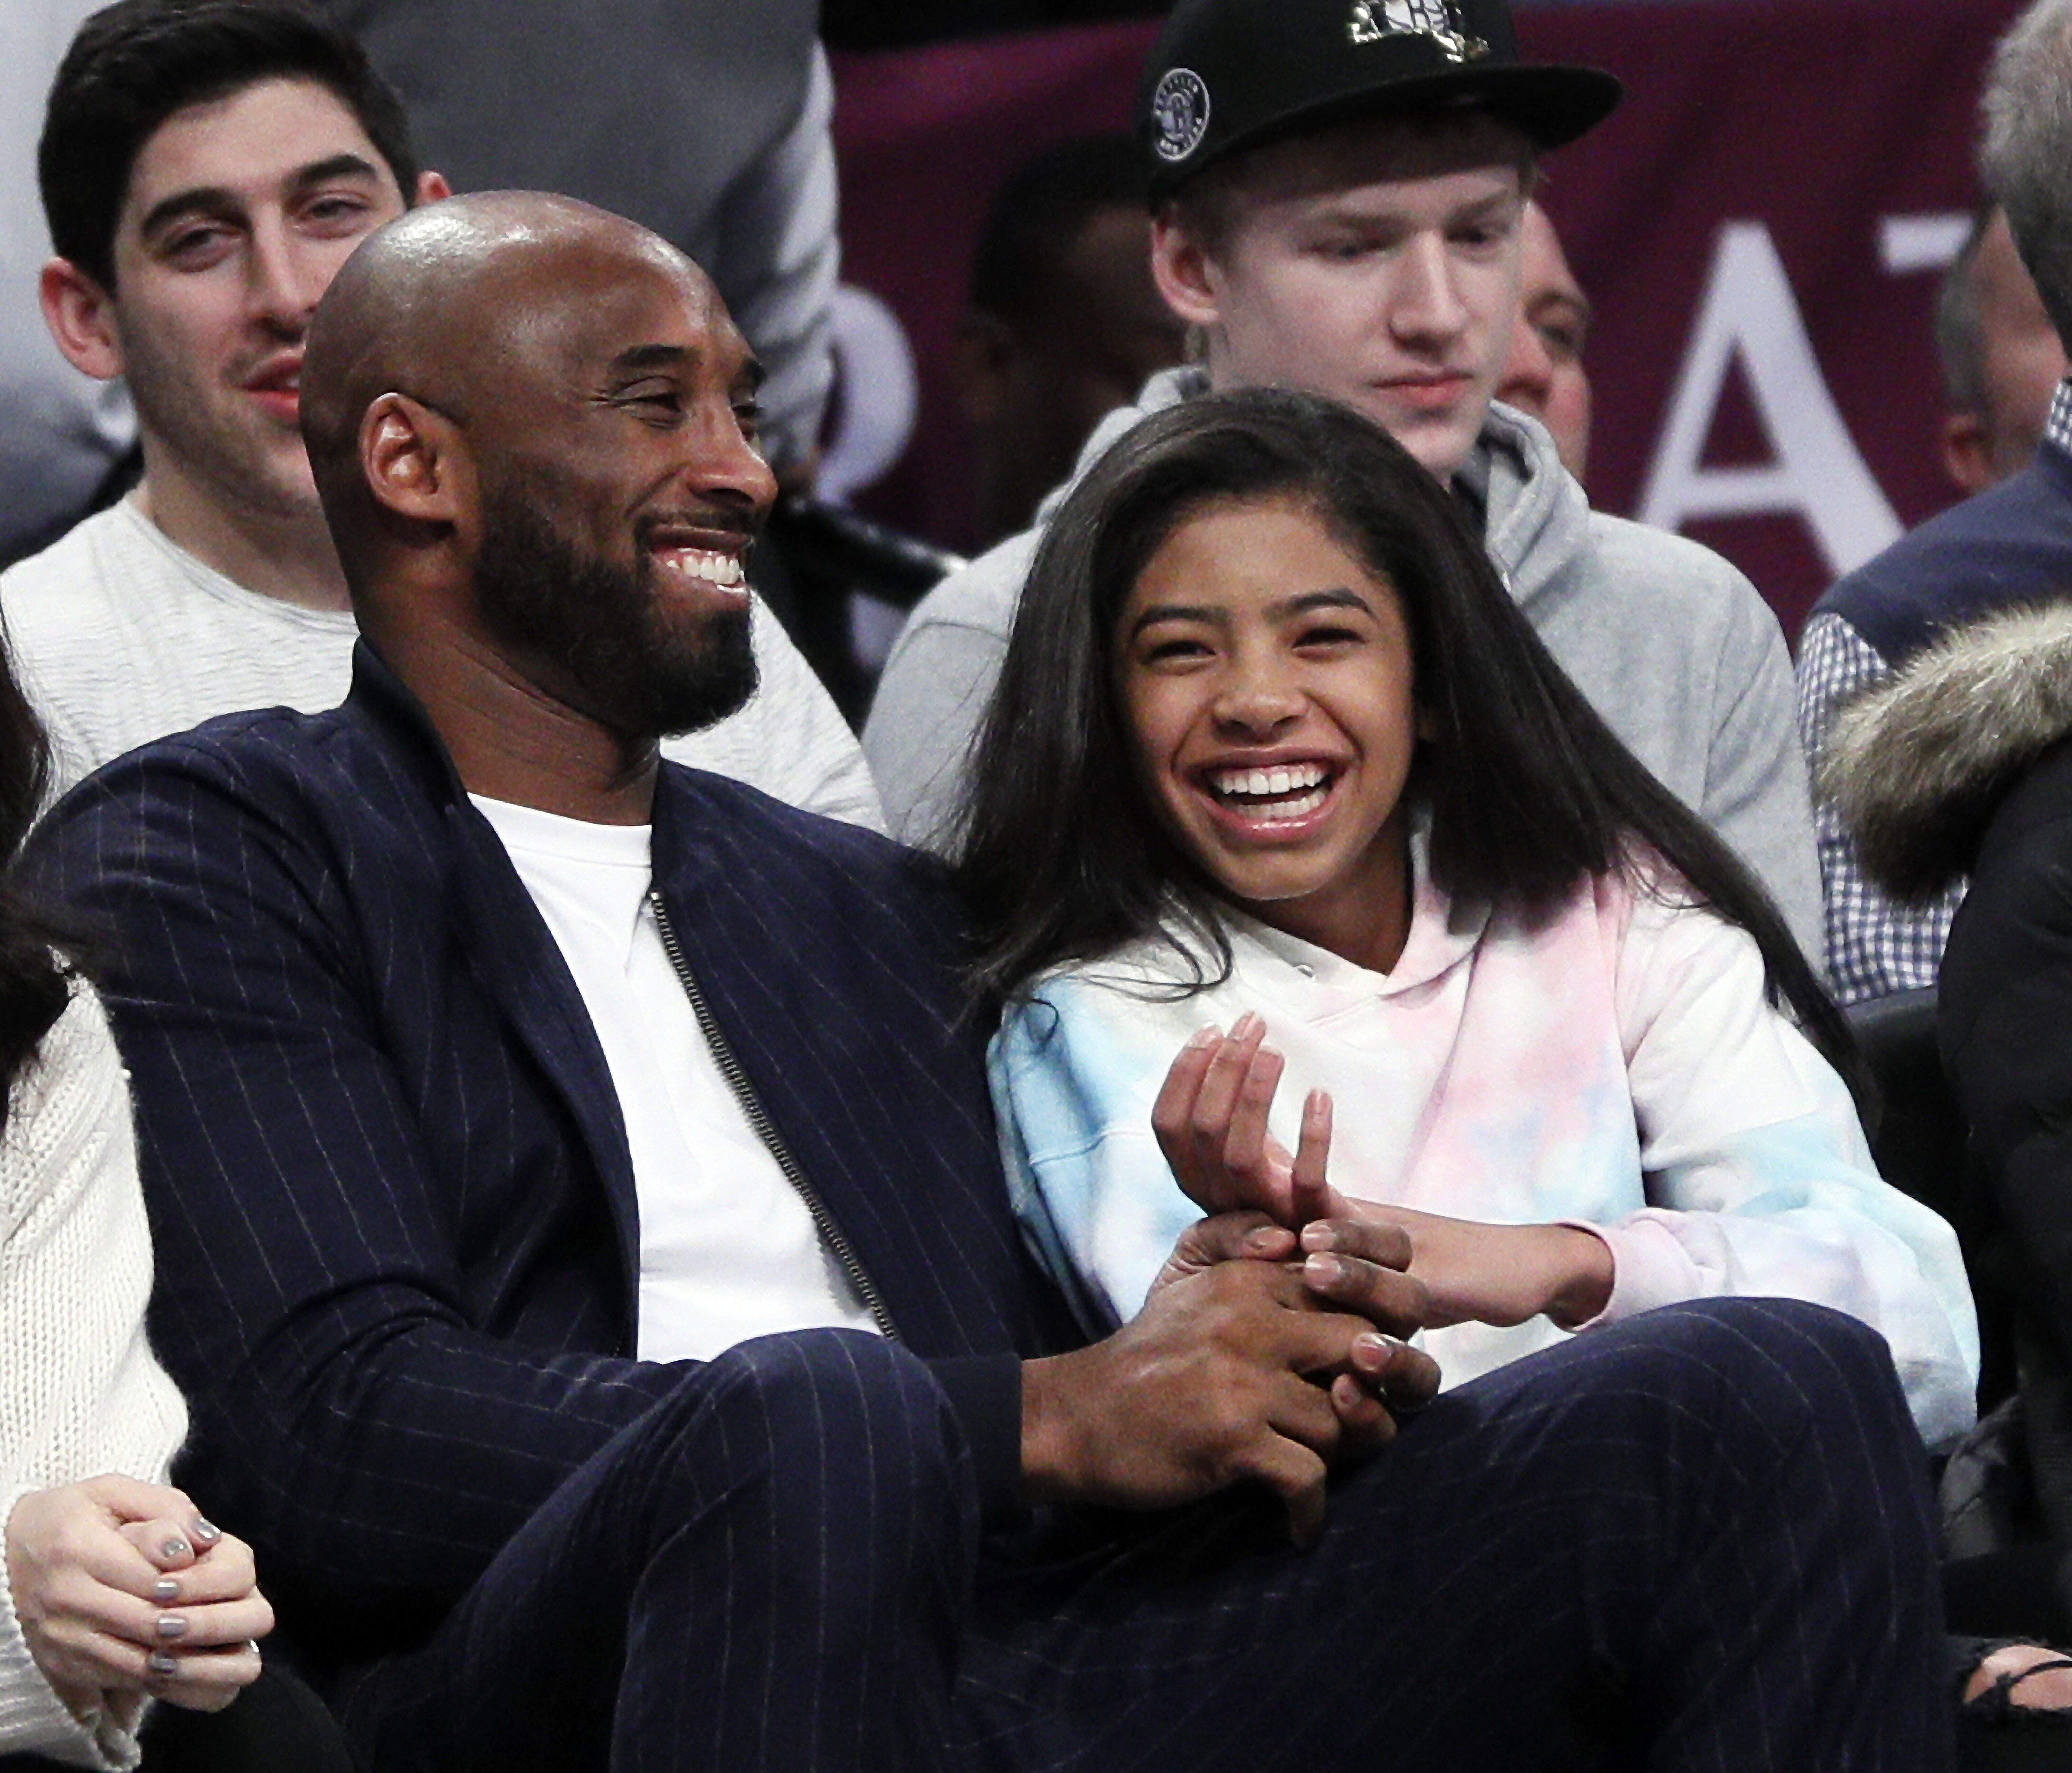 Kobe Bryant and his daughter Gigi at an NBA basketball game in December, 2019/ Source: Getty Images